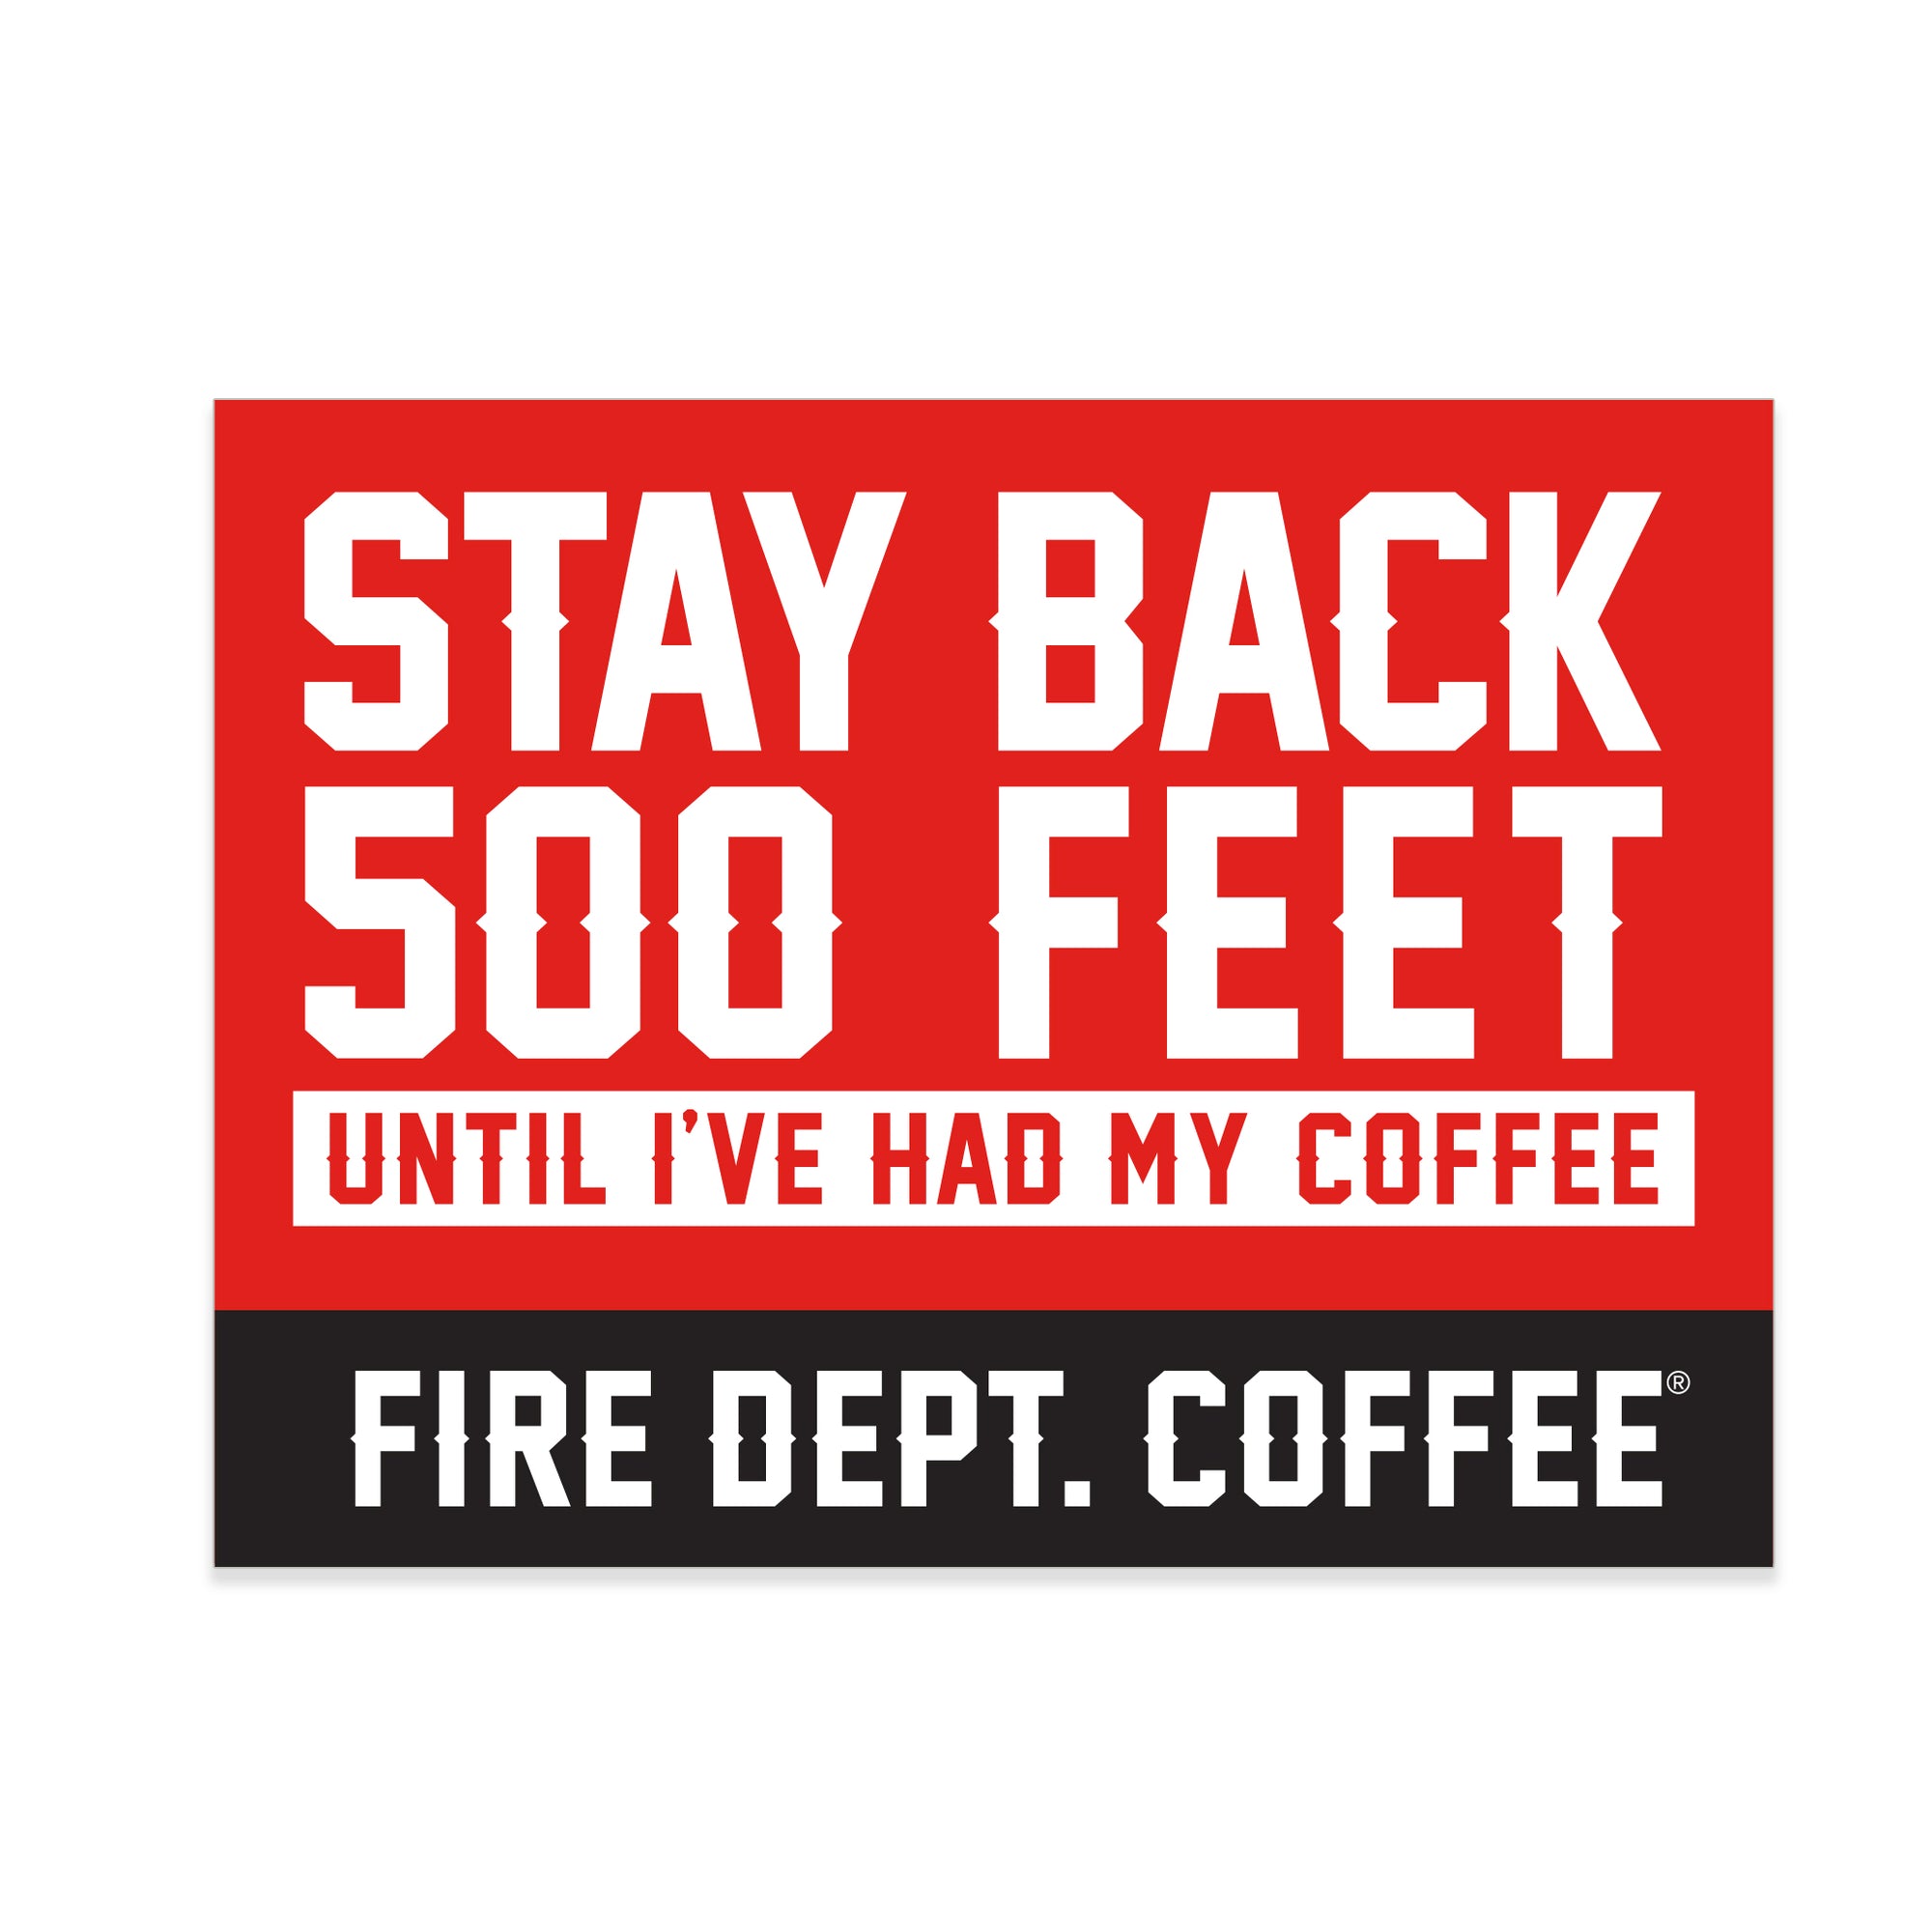 A red sticker with white text that reads STAY BACK 500 FEET UNTIL I'VE HAD MY COFFEE